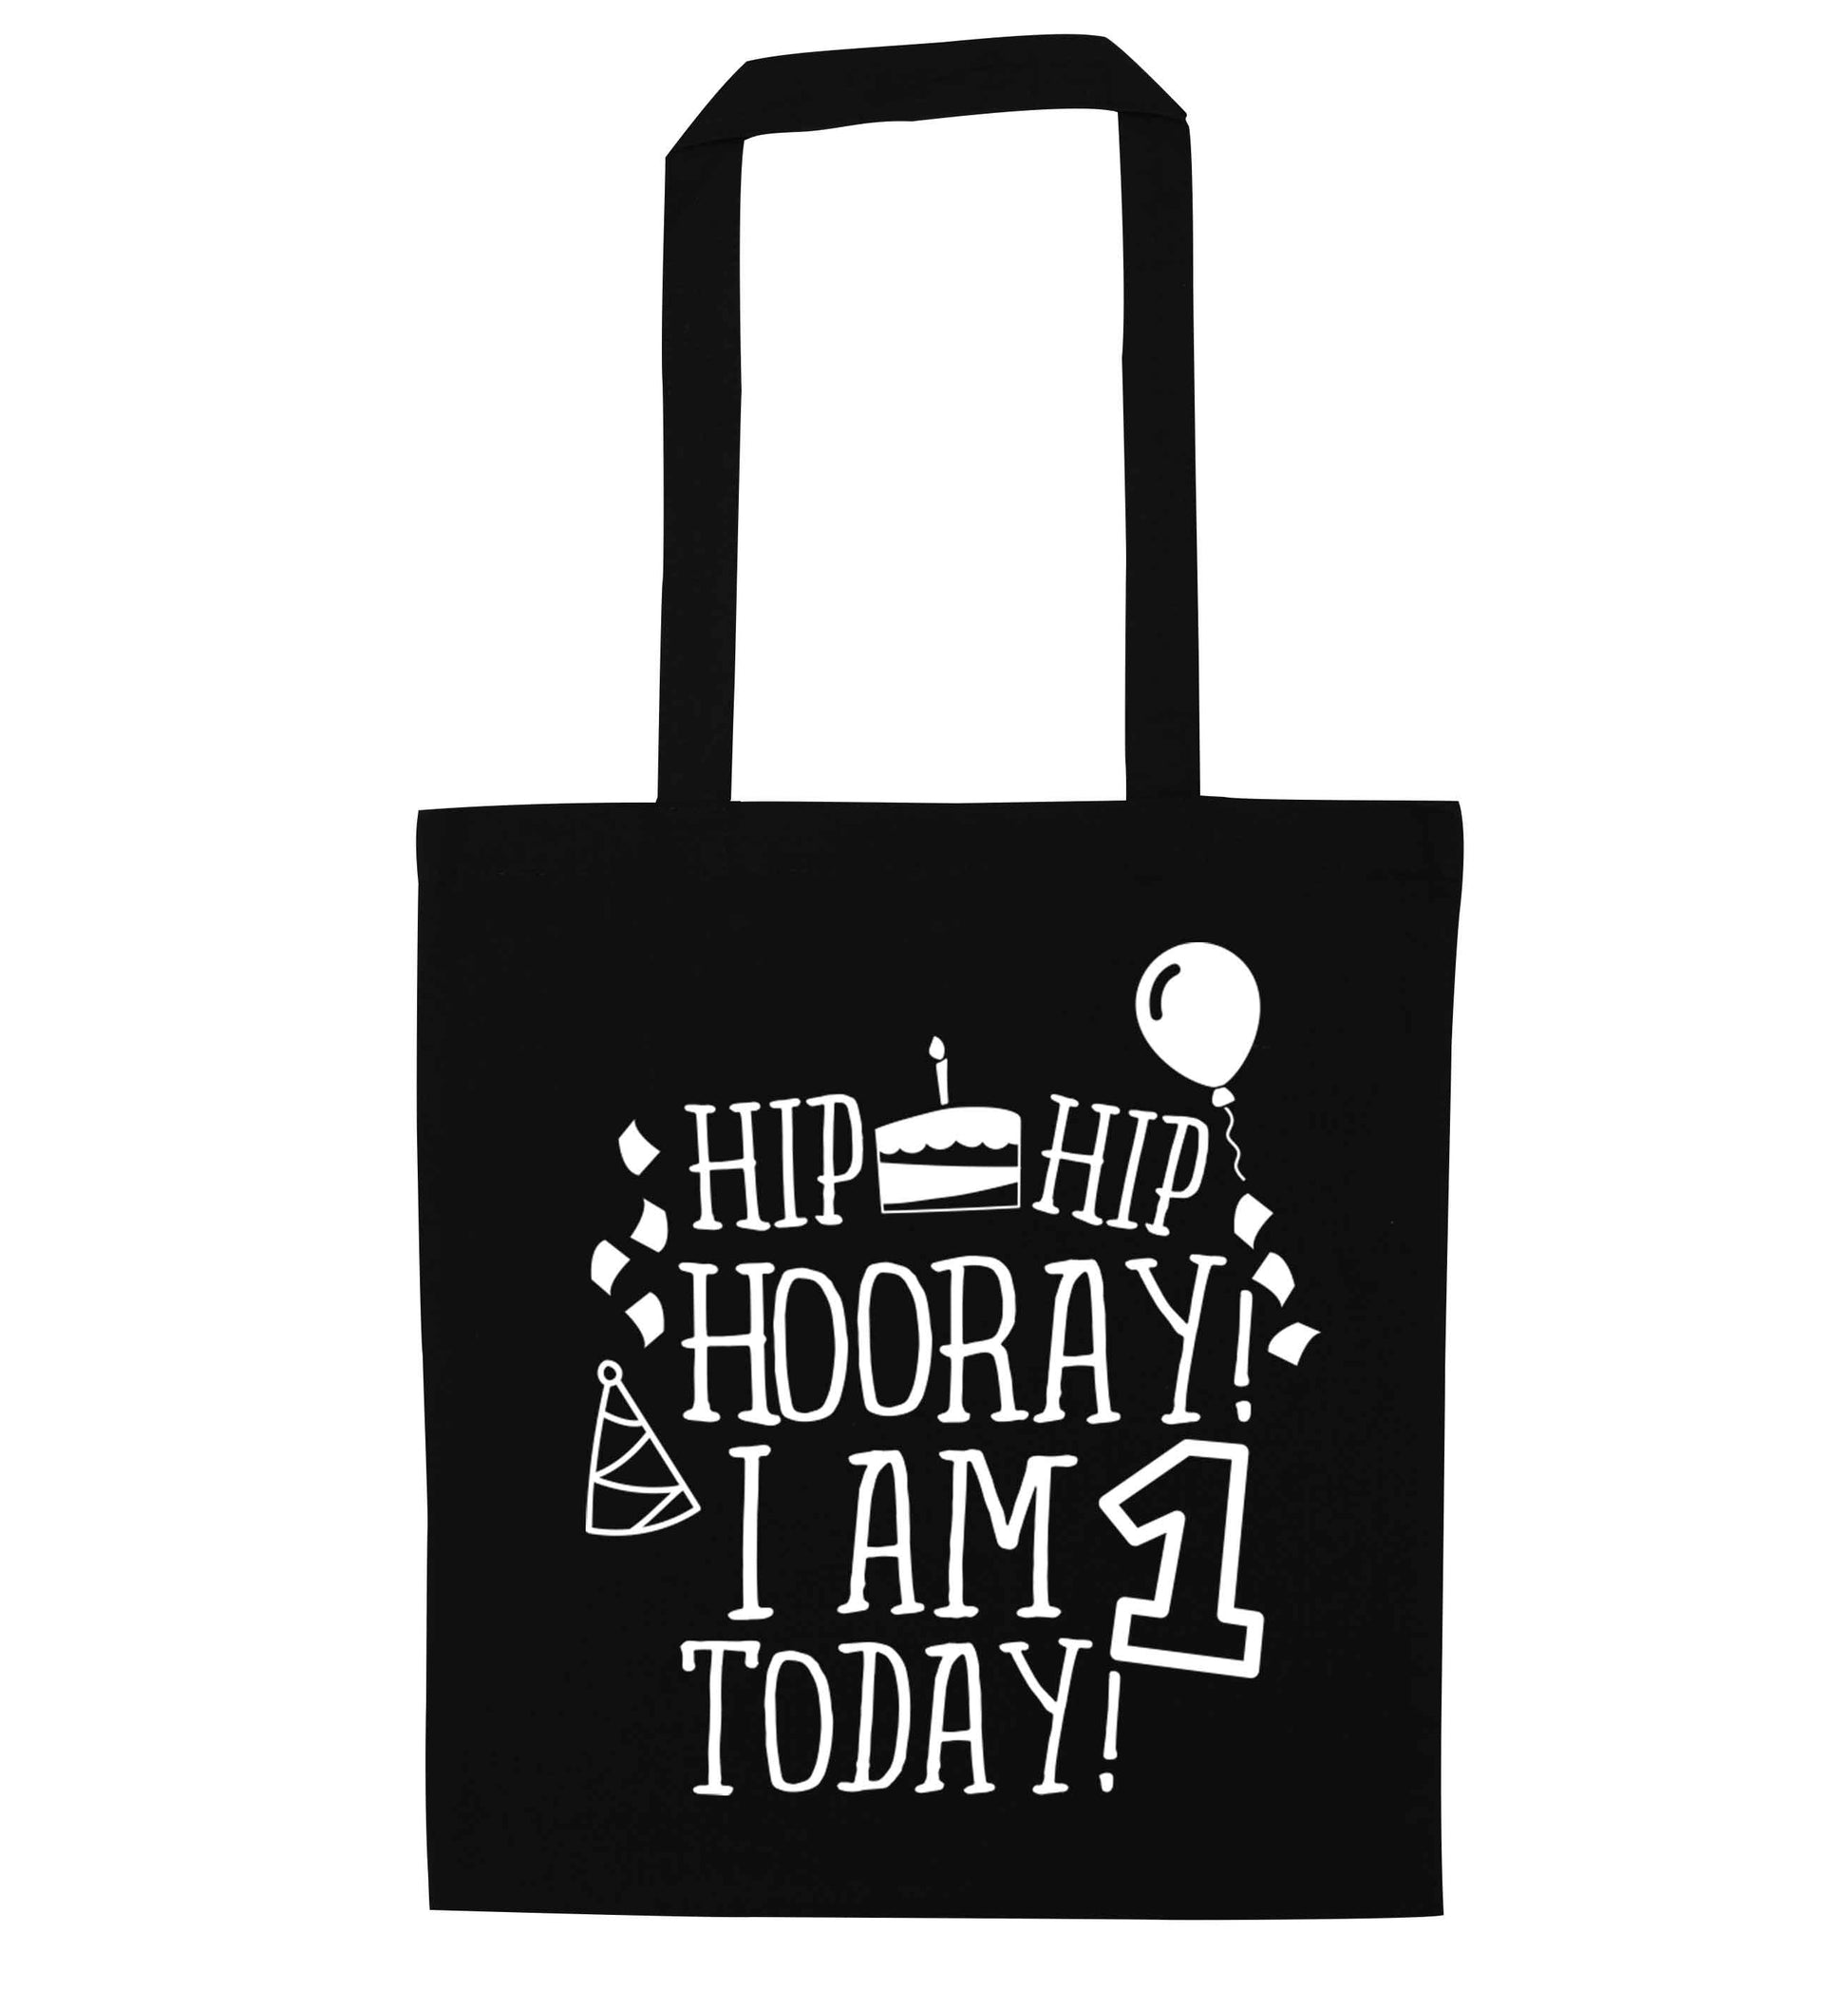 I am One Today black tote bag